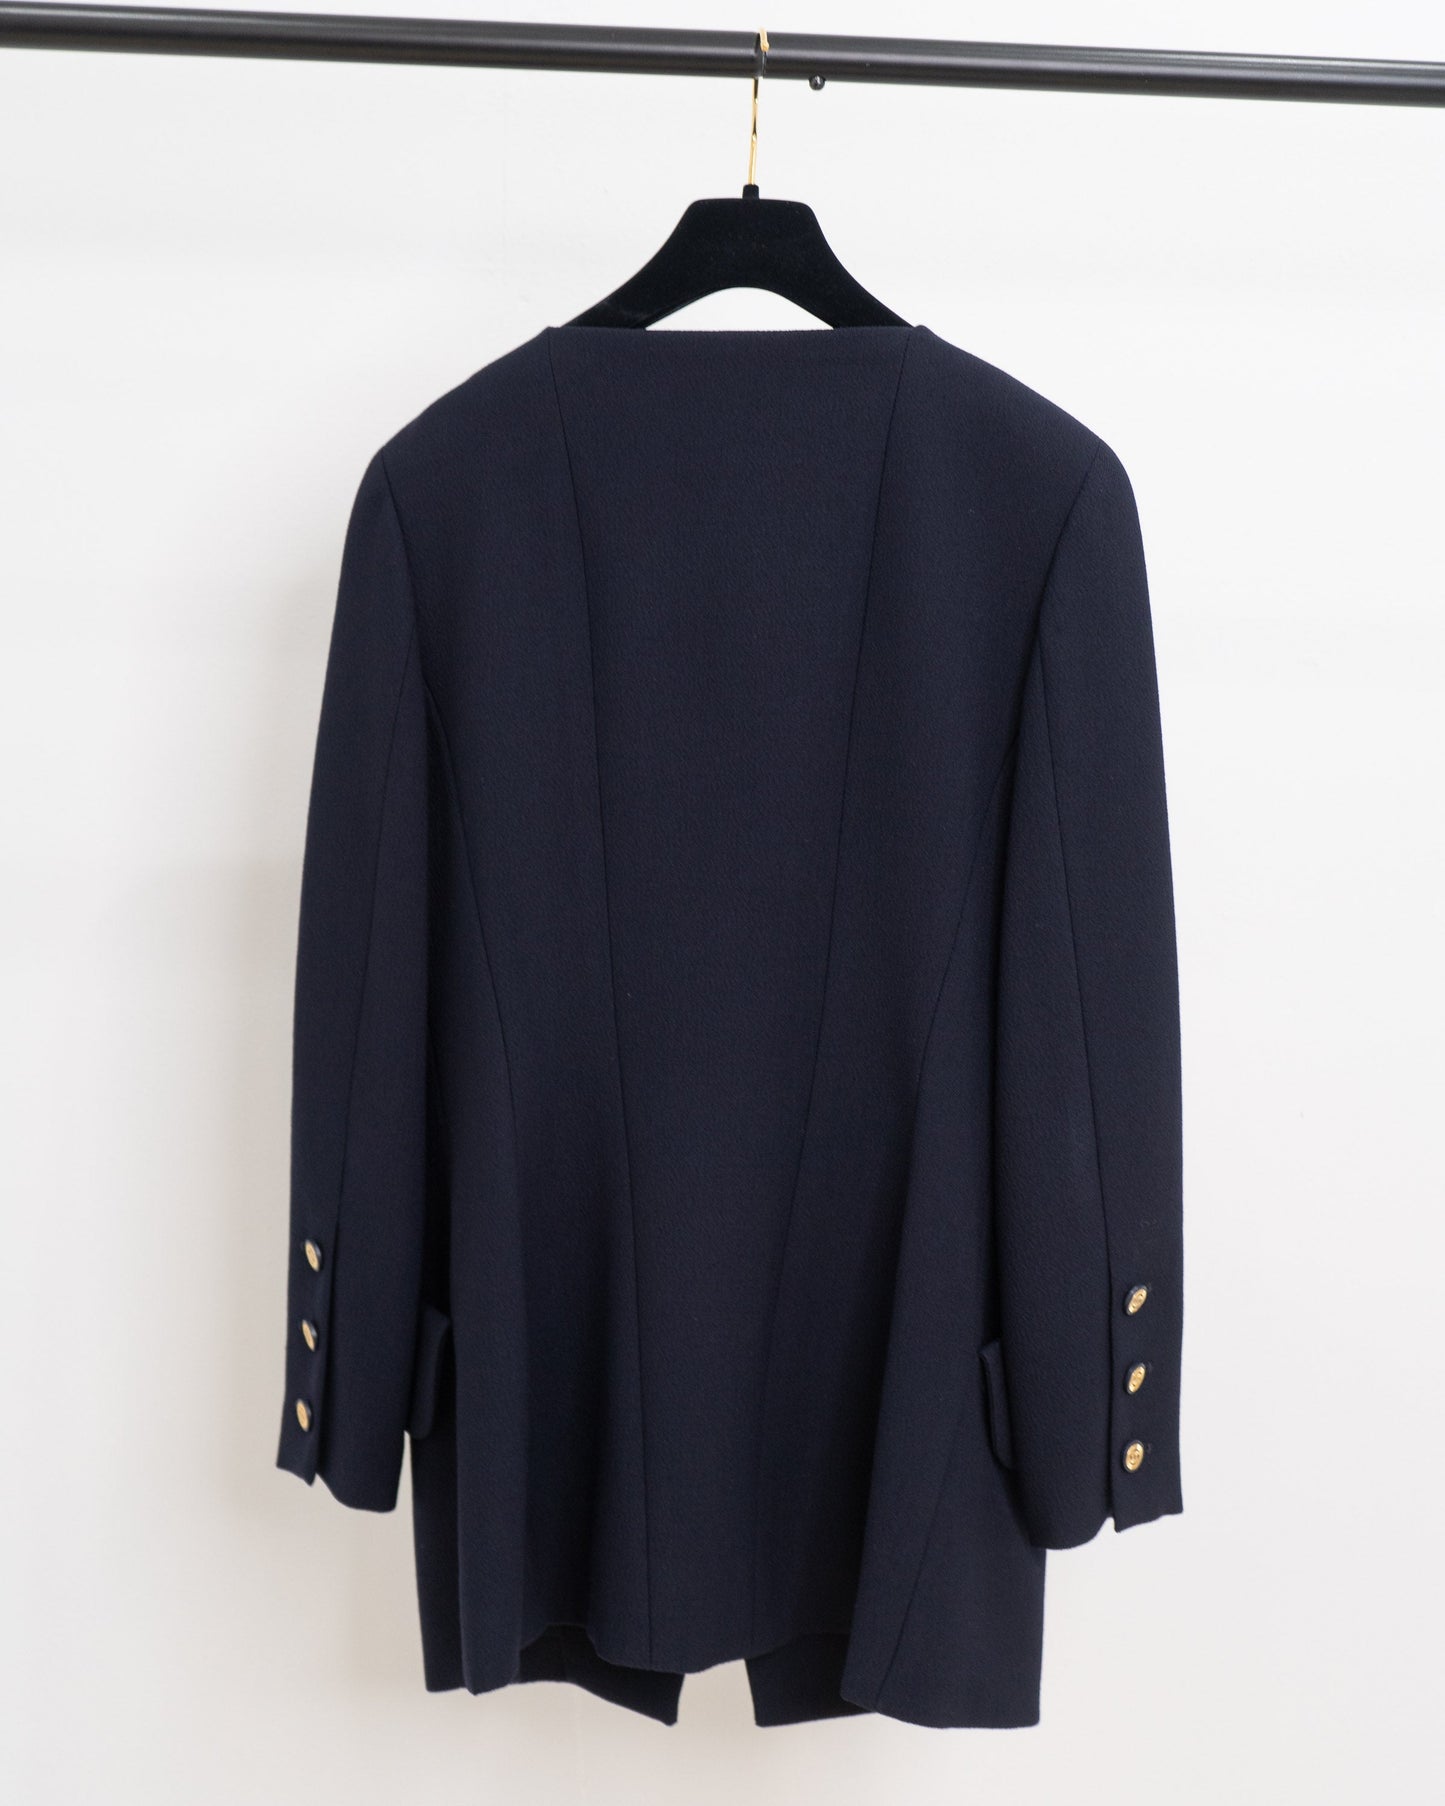 FR38-40 Chanel Fall 1991 Two-Pocketed Square Neckline Wool Jacket in Navy